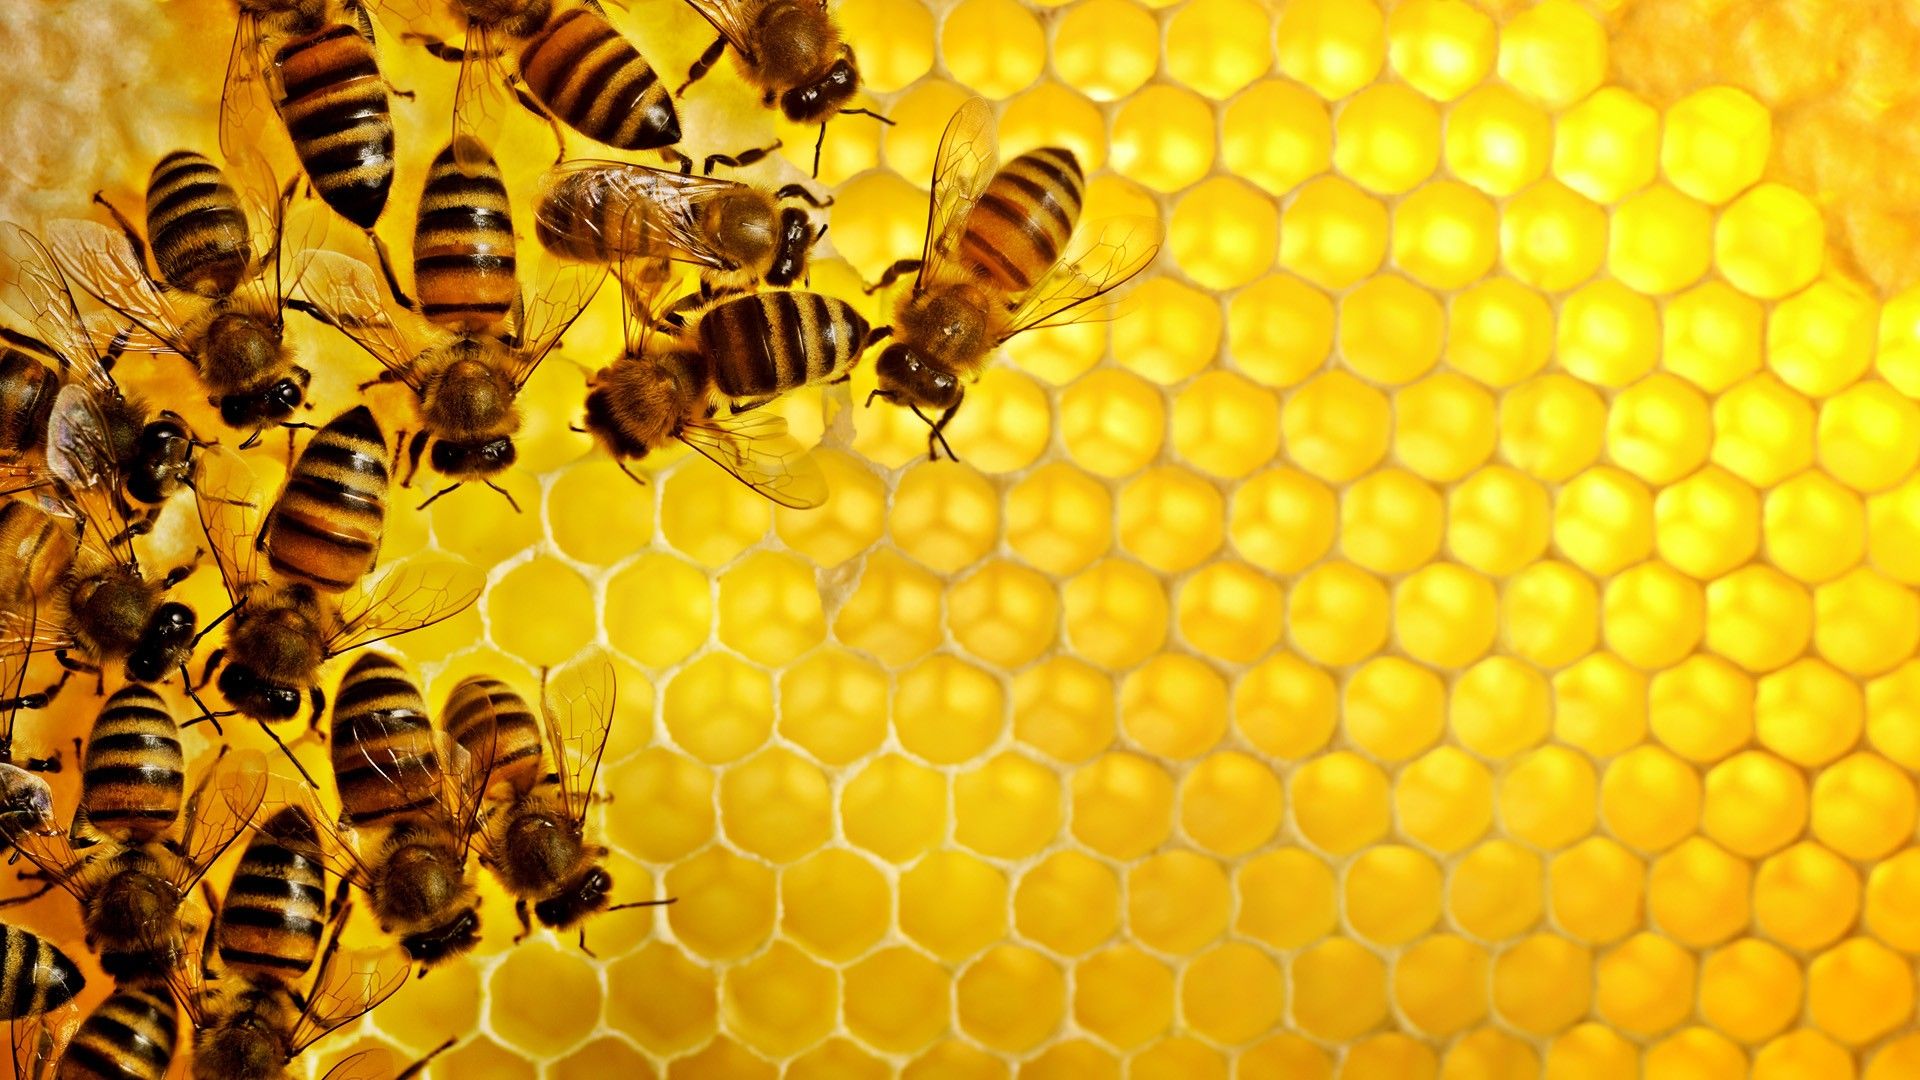 Bees on a honeycomb - Honey